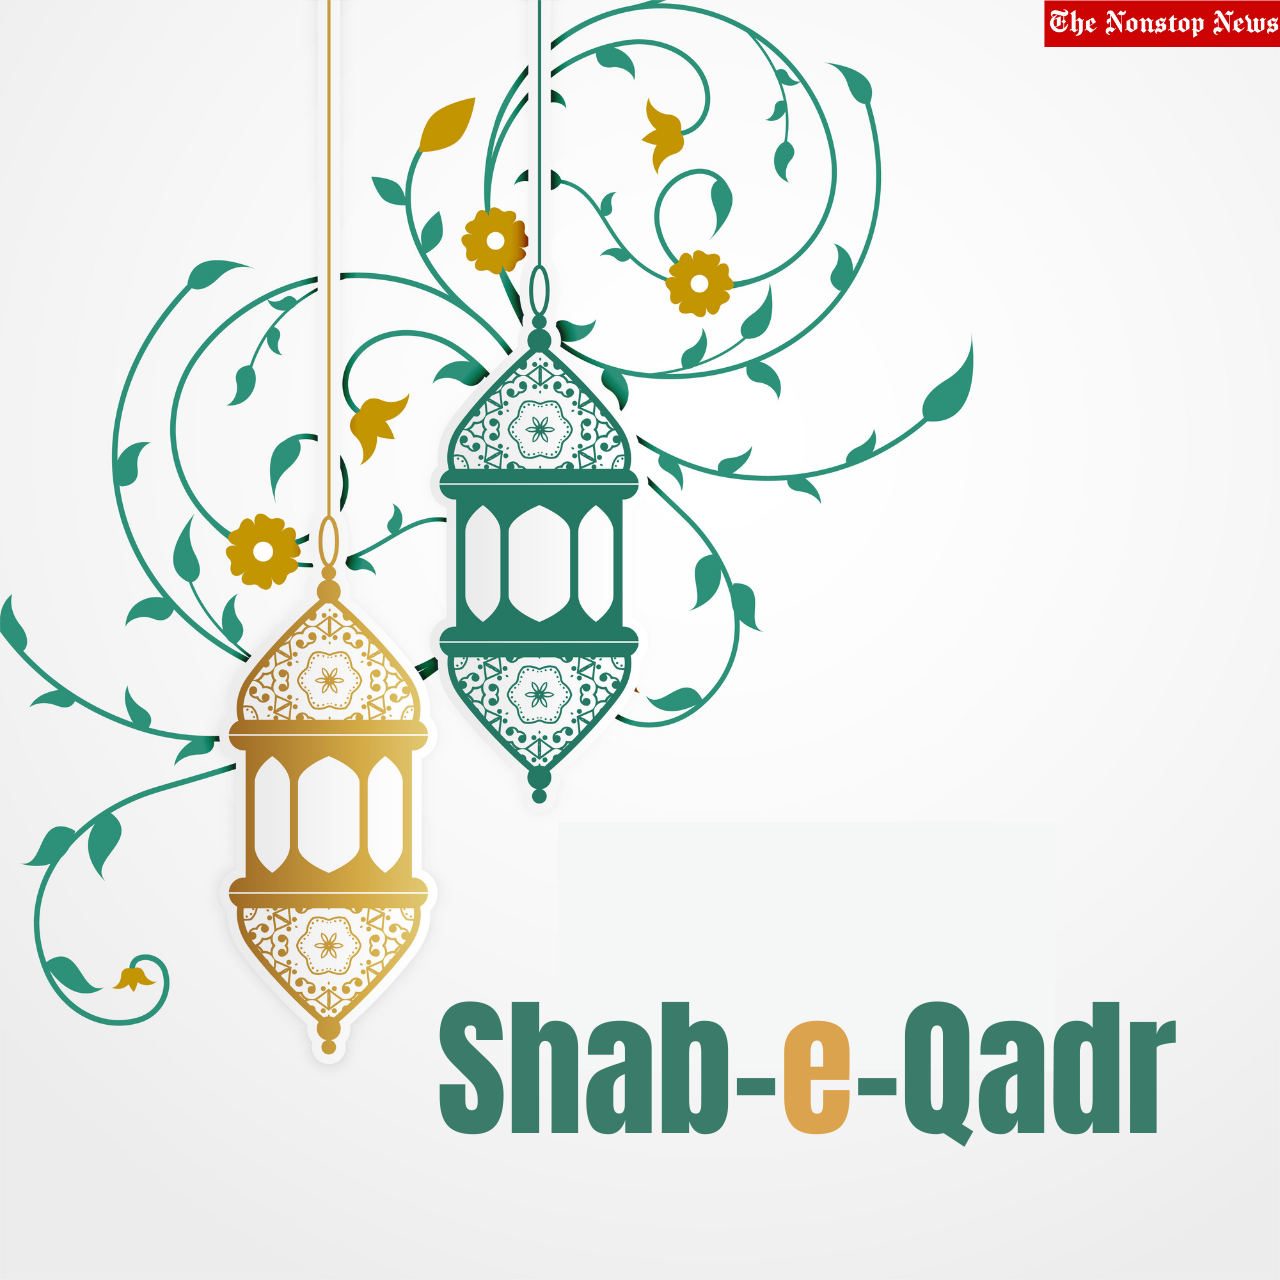 Shab-e-Qadr 2022: Best Instagram Captions, WhatsApp Stickers, Shayari, Twitter Messages, Facebook Quotes To Share